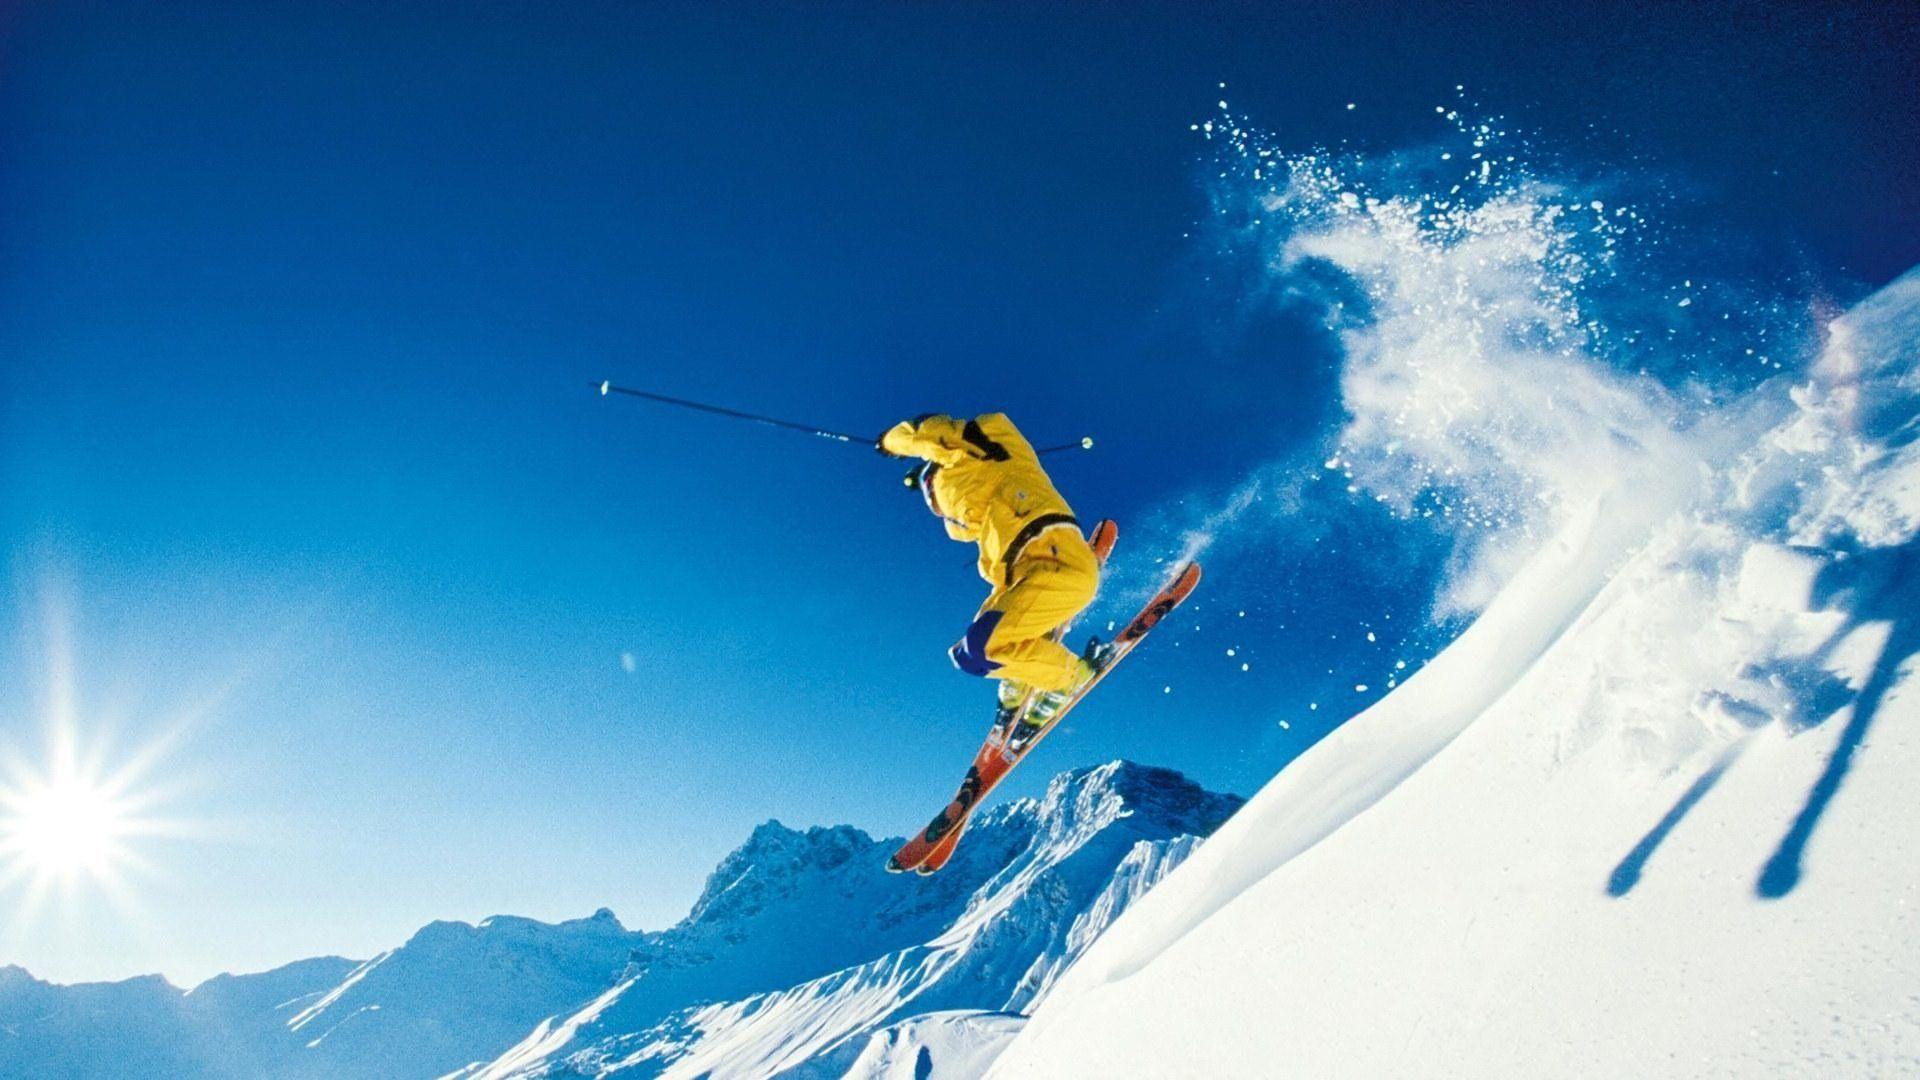 Download Skiing wallpapers for mobile phone free Skiing HD pictures